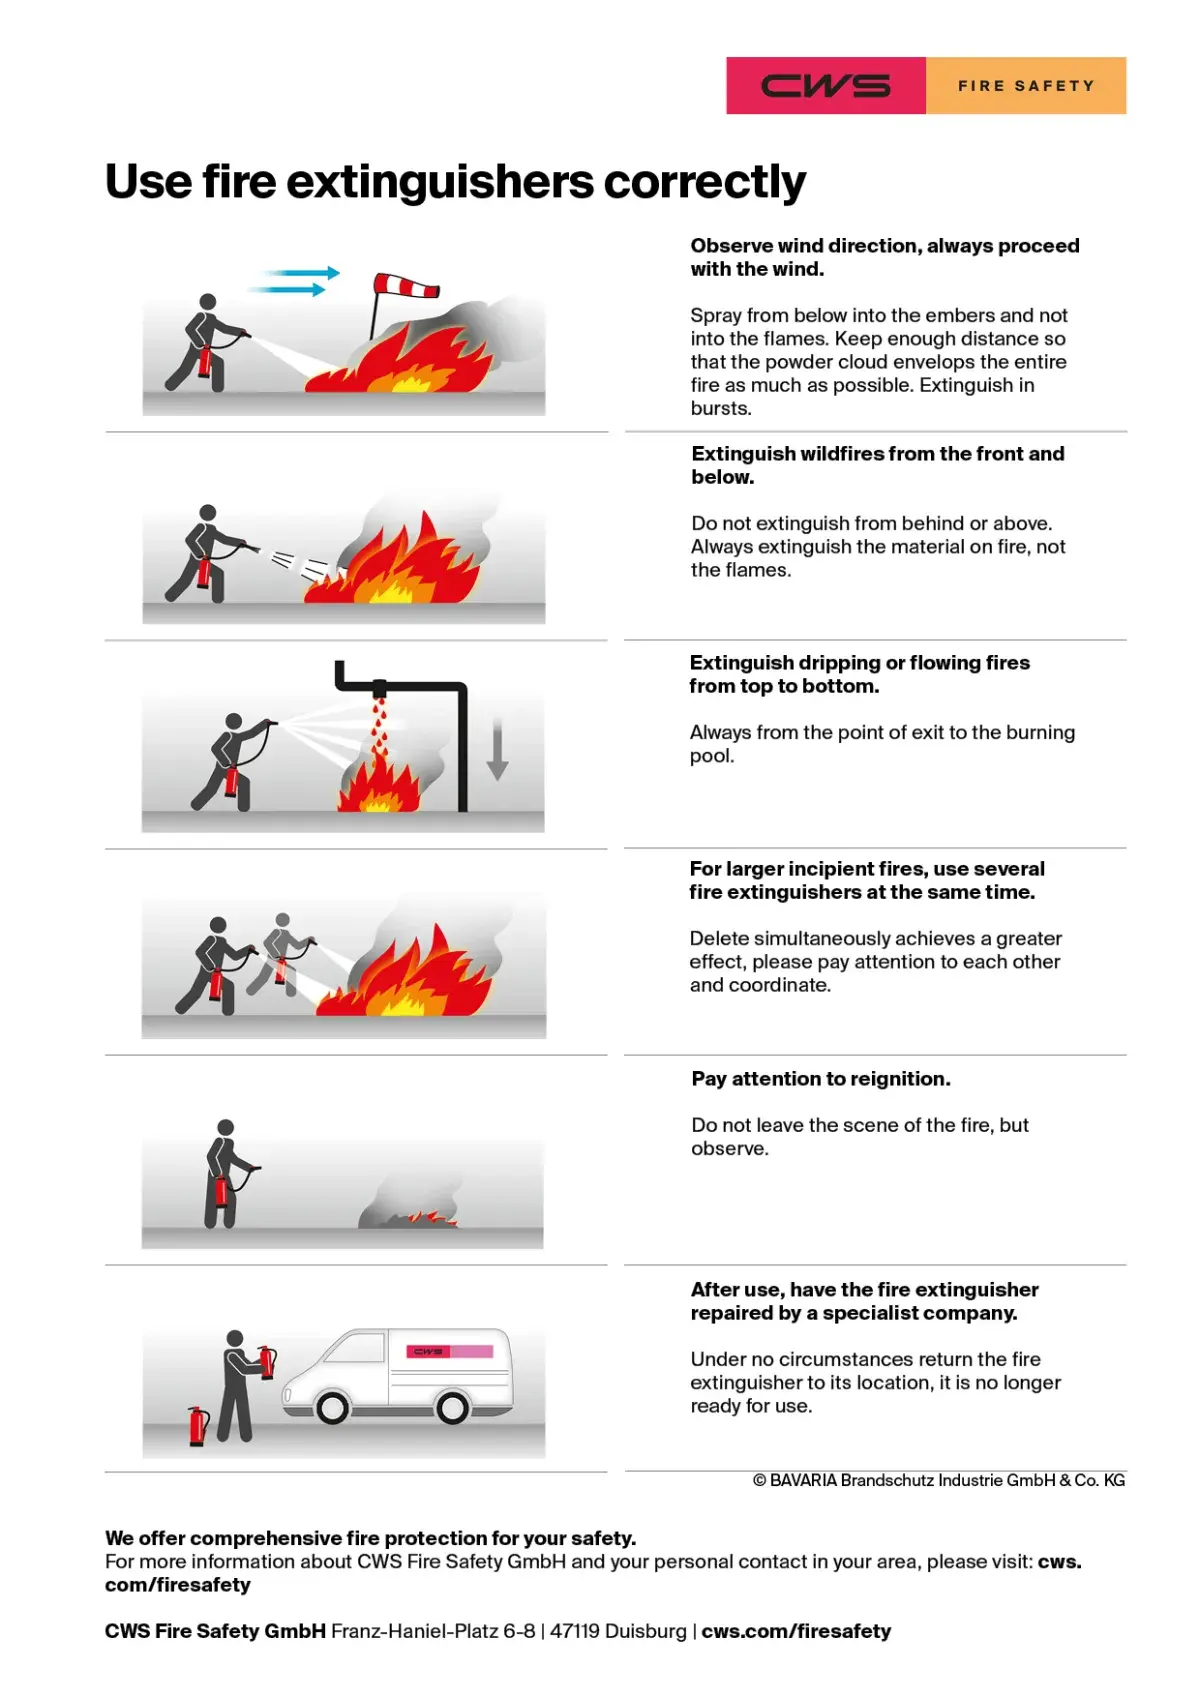 Extinguish fire correctly-CWS Fire Safety